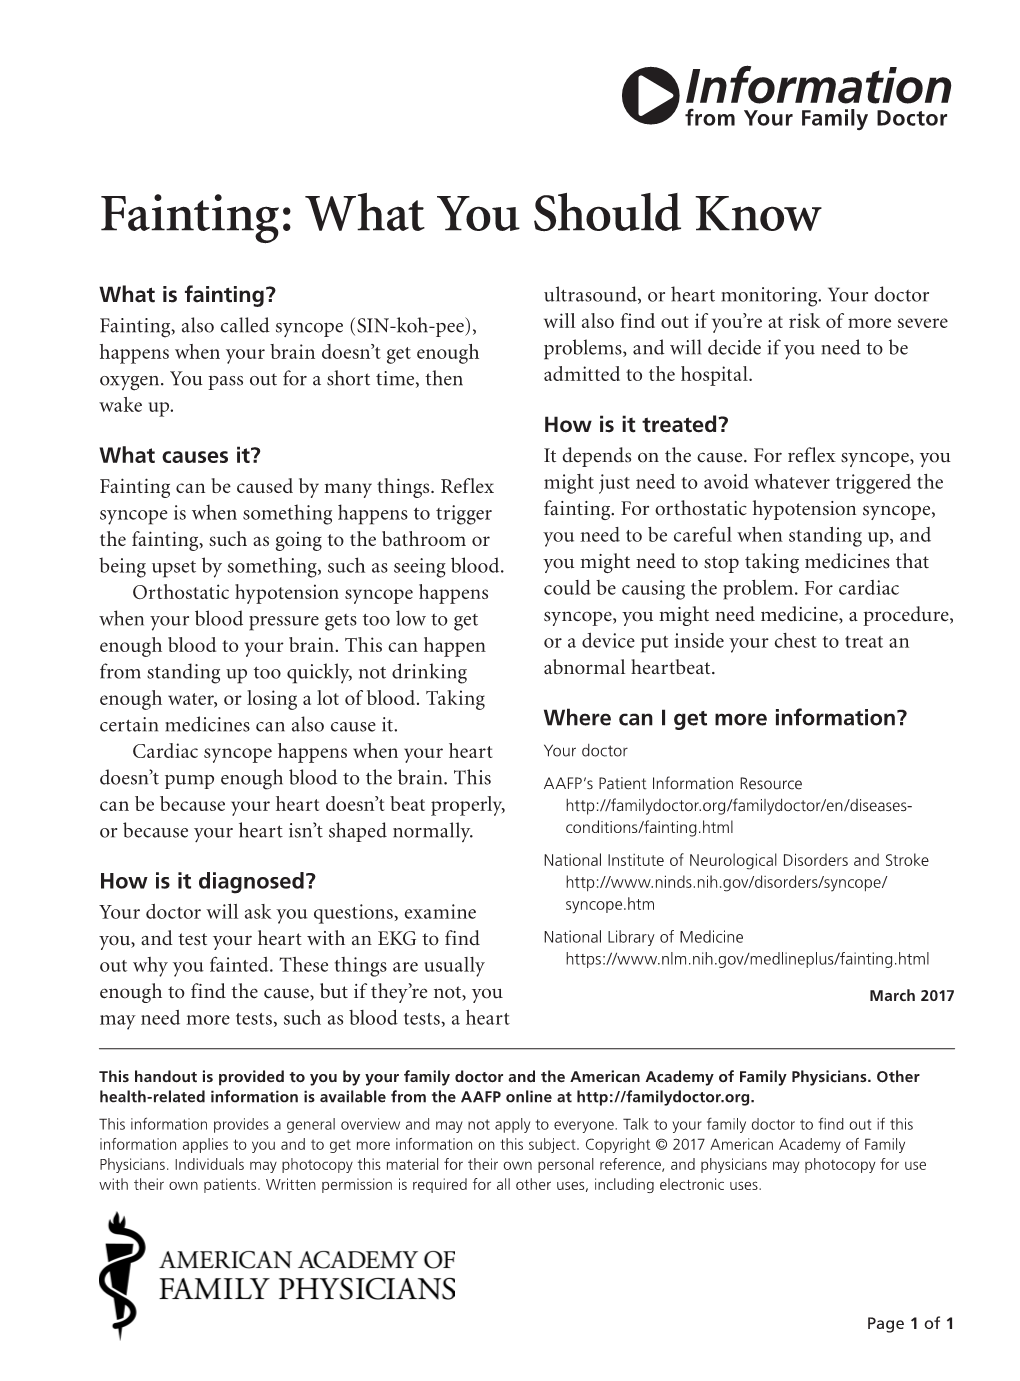 Fainting: What You Should Know